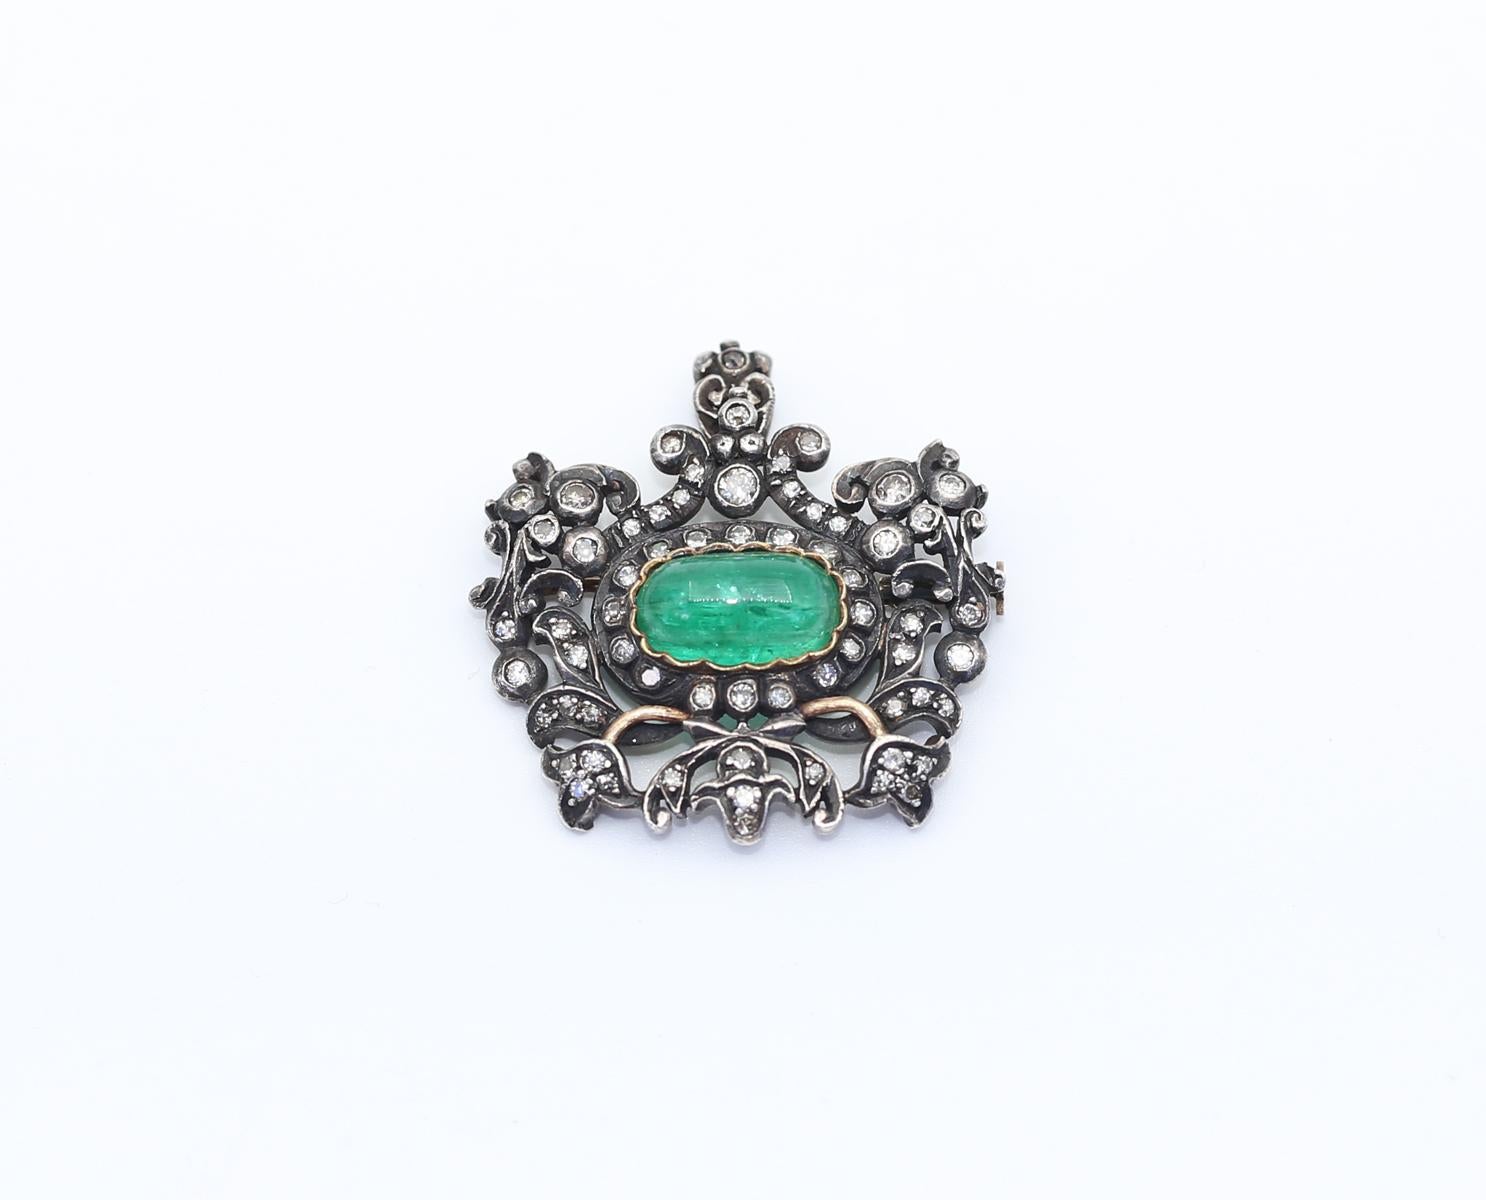 Emerald Rose-cut Diamonds Brooch Pin Pendant Silver Gold. Created around 1890.
Finely detailed High-Quality Antique Diamond Gold and Silver Brooch that is also a pendant. There is a loop on top that is big enough to accommodate a chain or a lace.